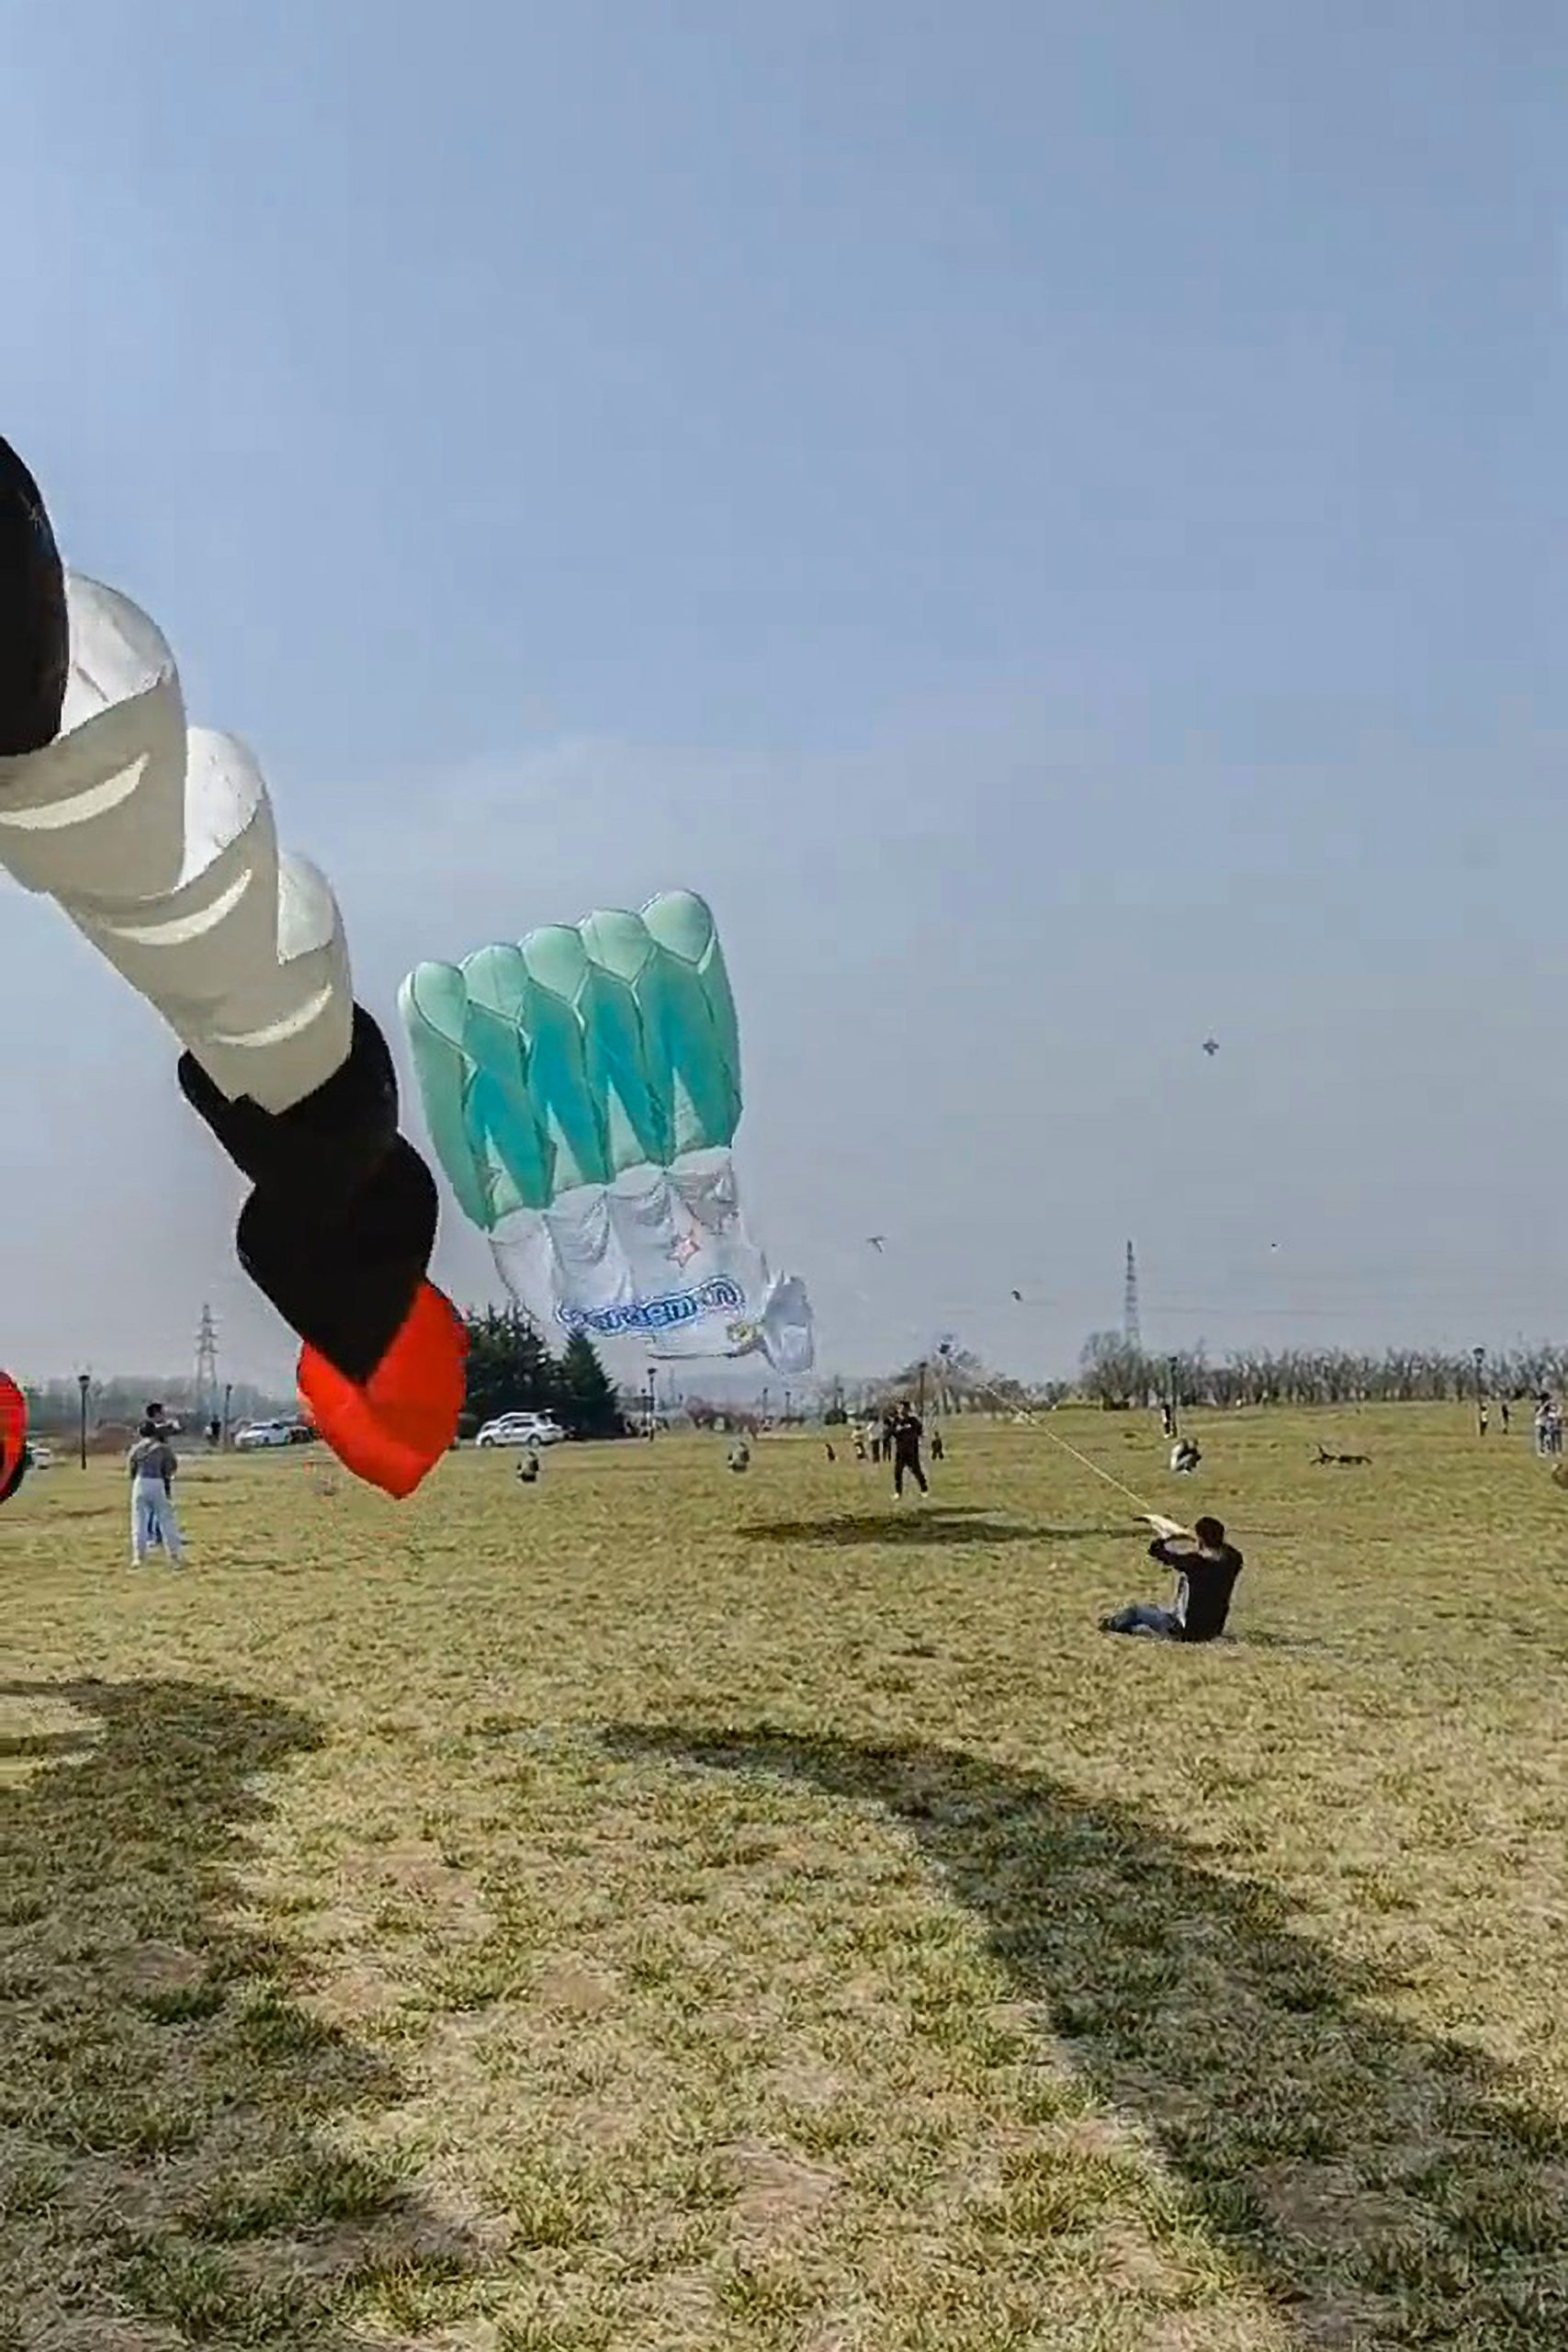 Read more about the article GRASSED UP: Man Surfs On Grass As Kite Drags Him Along